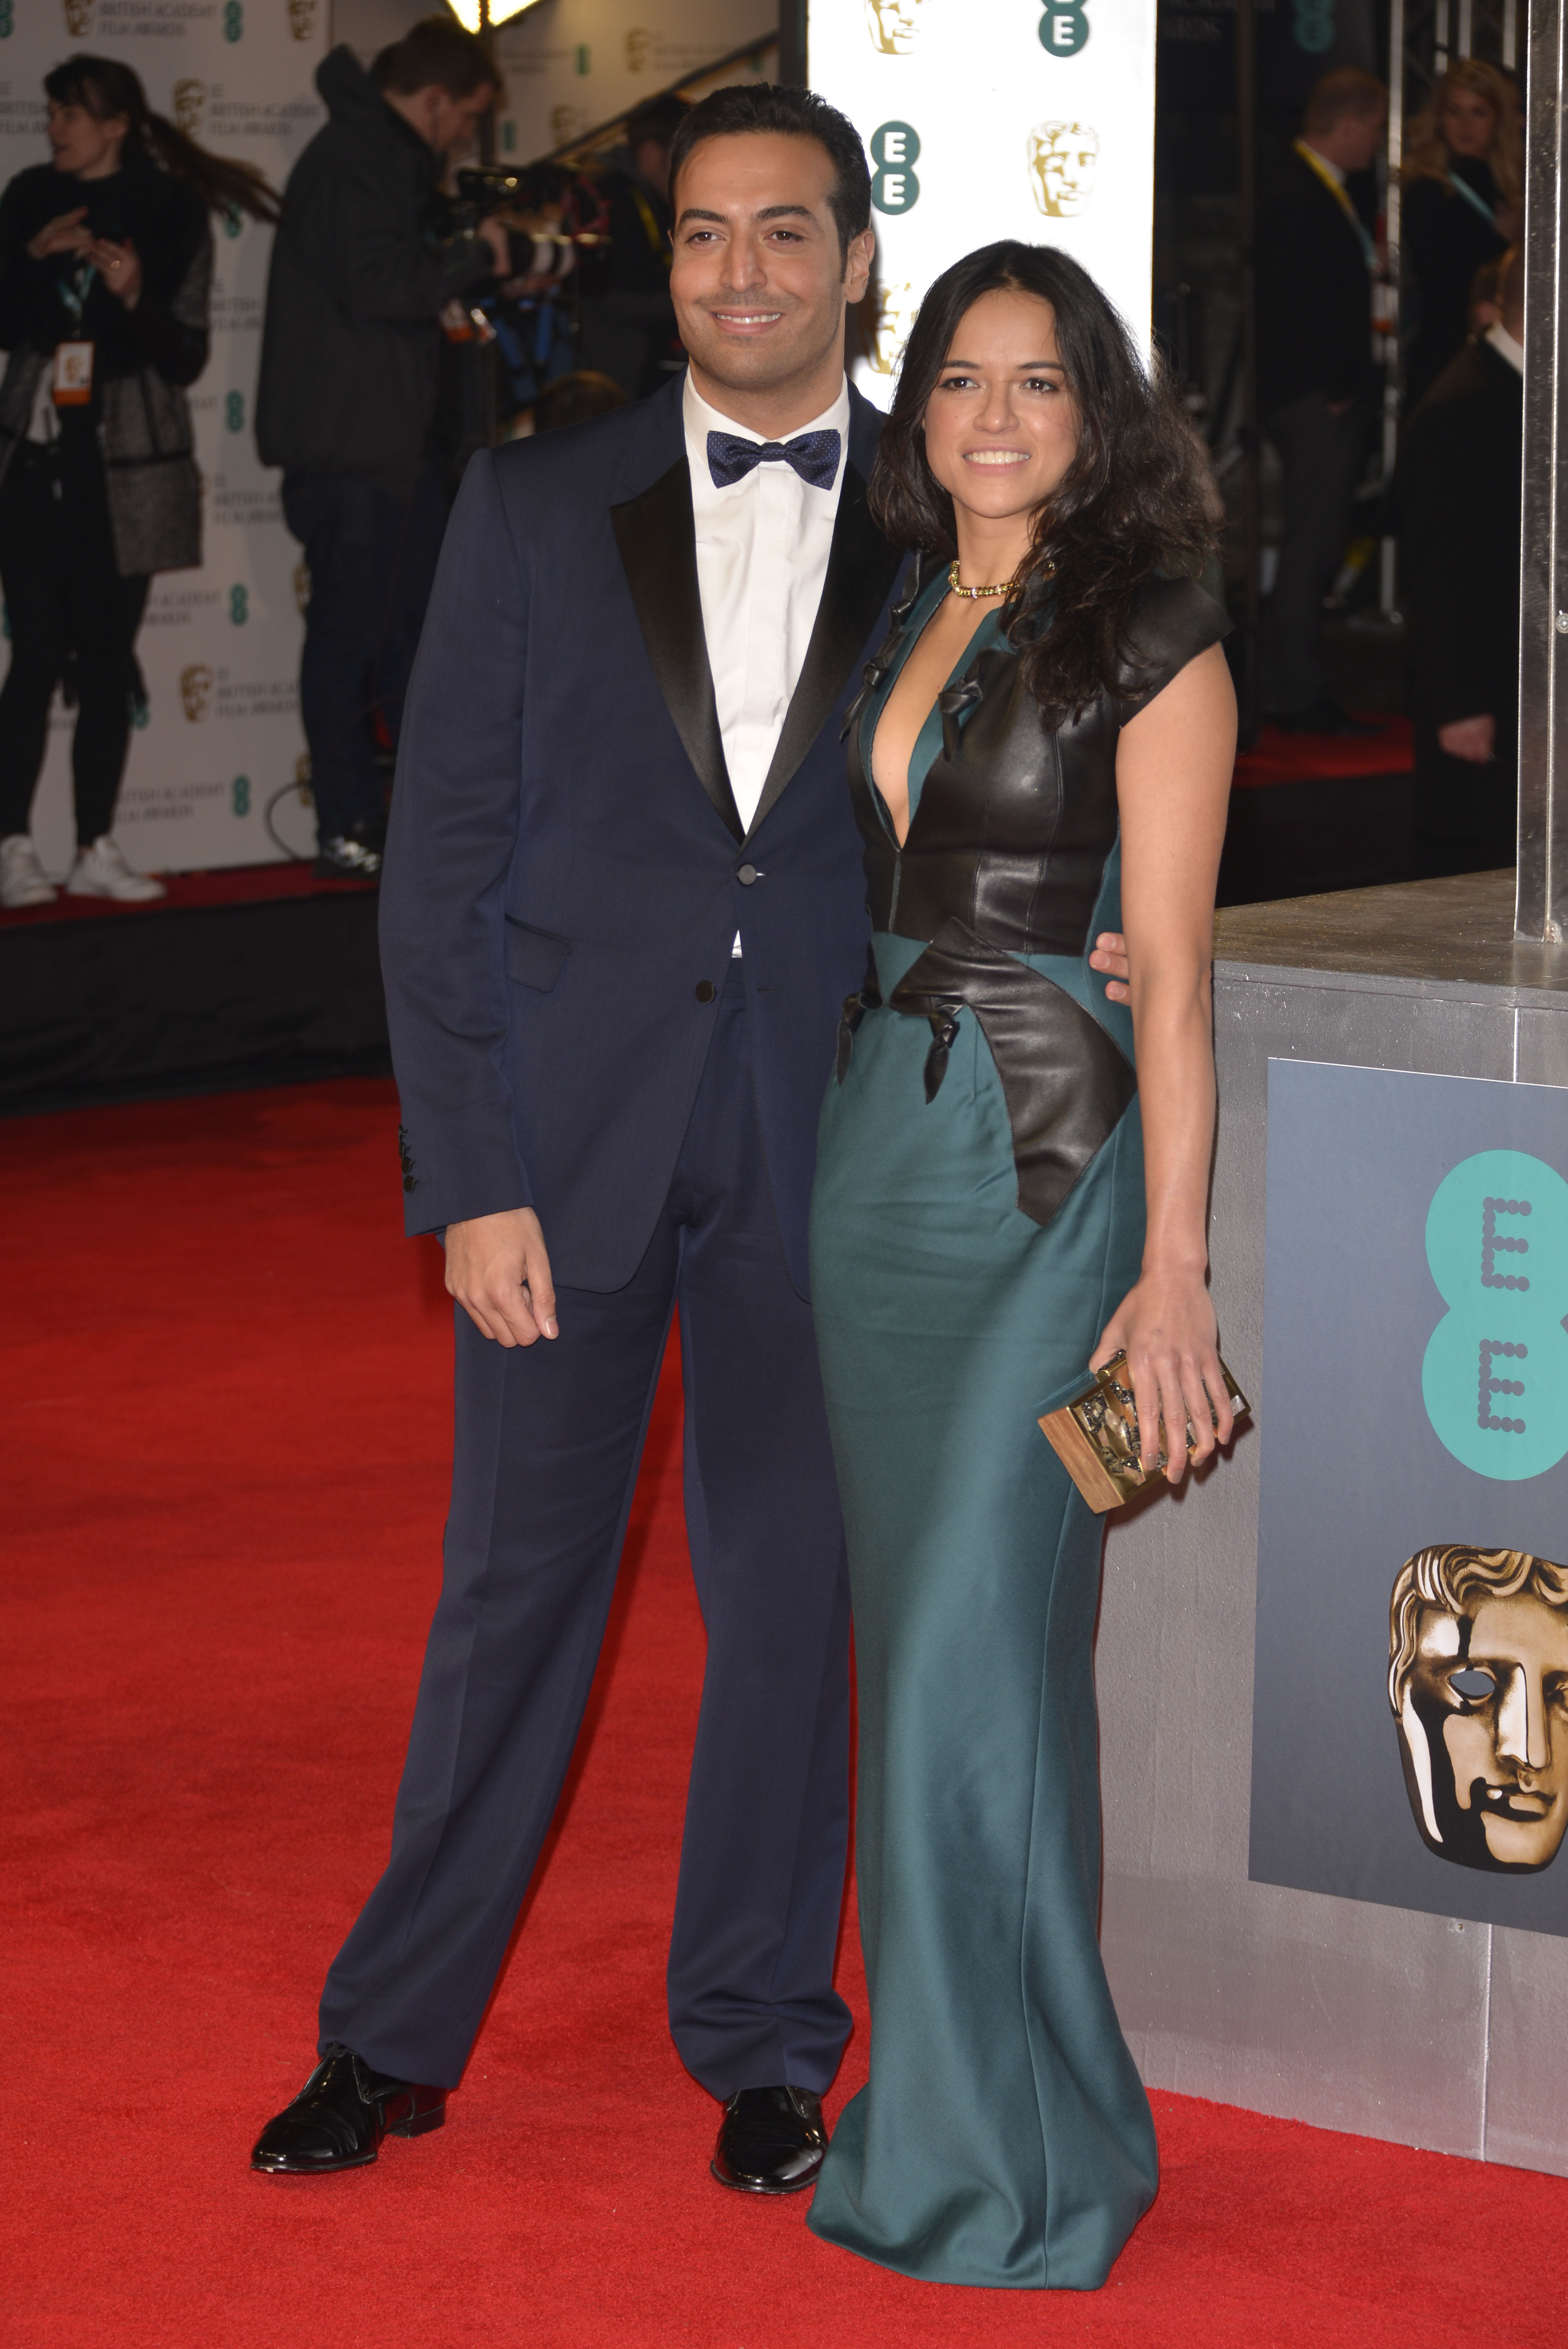 LONDON, ENGLAND - FEBRUARY 16: Saudi Arabia's Mohammed Al Turki and Actress Michelle Rodriguez attend the EE British Academy Film Awards 2014 at The Royal Opera House on February 16, 2014 in London, England.